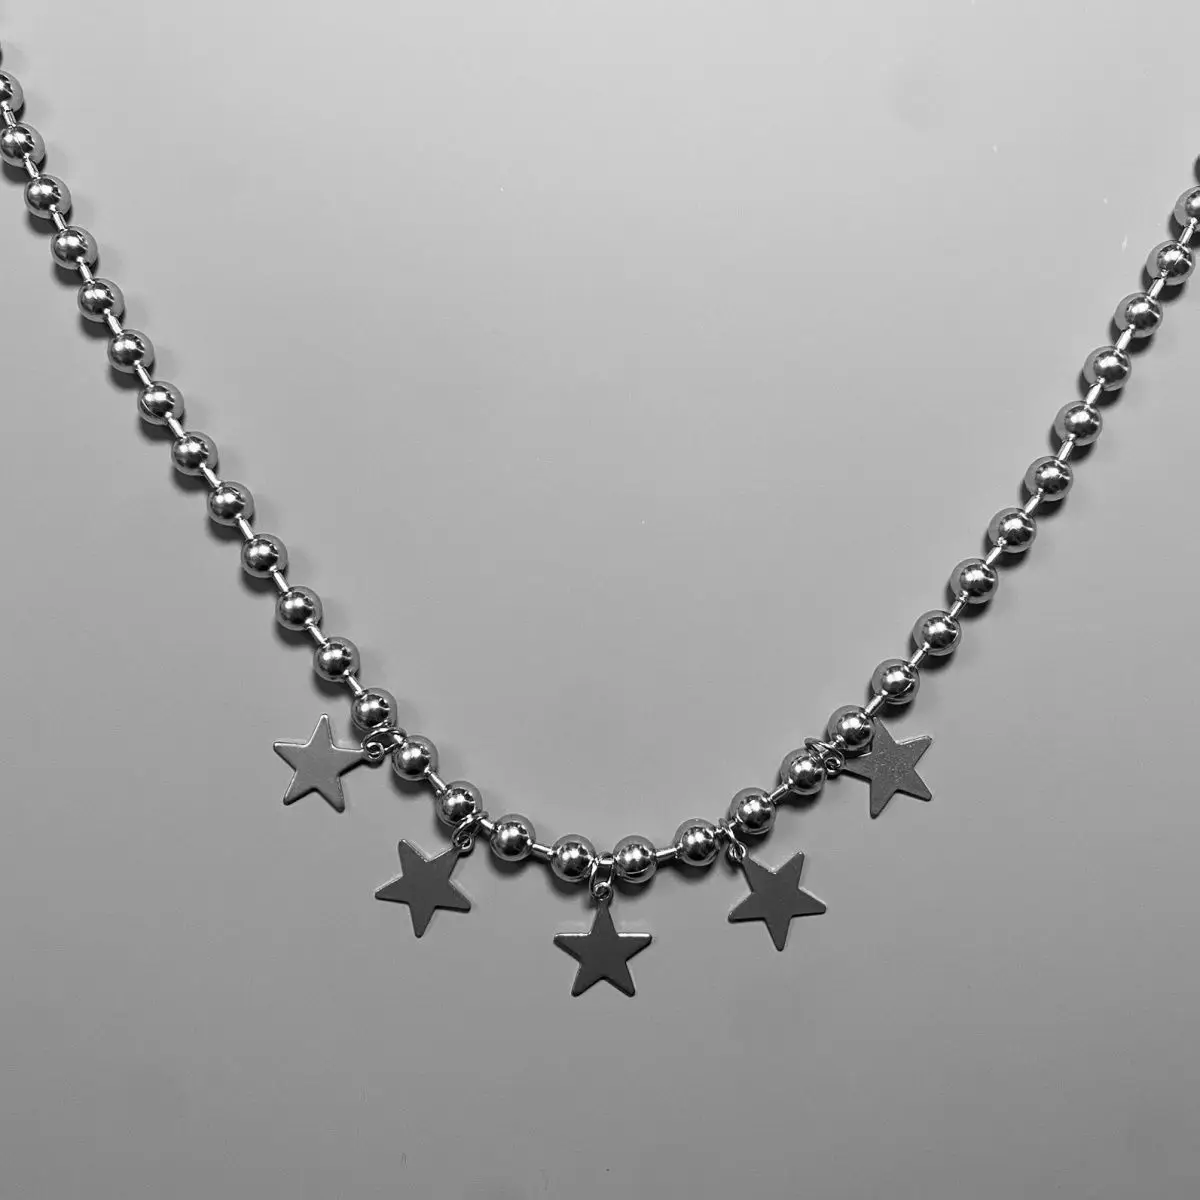 New Fashion Trend Sexy Babes Pentagram Necklace Clavicle Chain Retro Simple Personality Design Necklaces for Women Jewerly Gifts images - 6